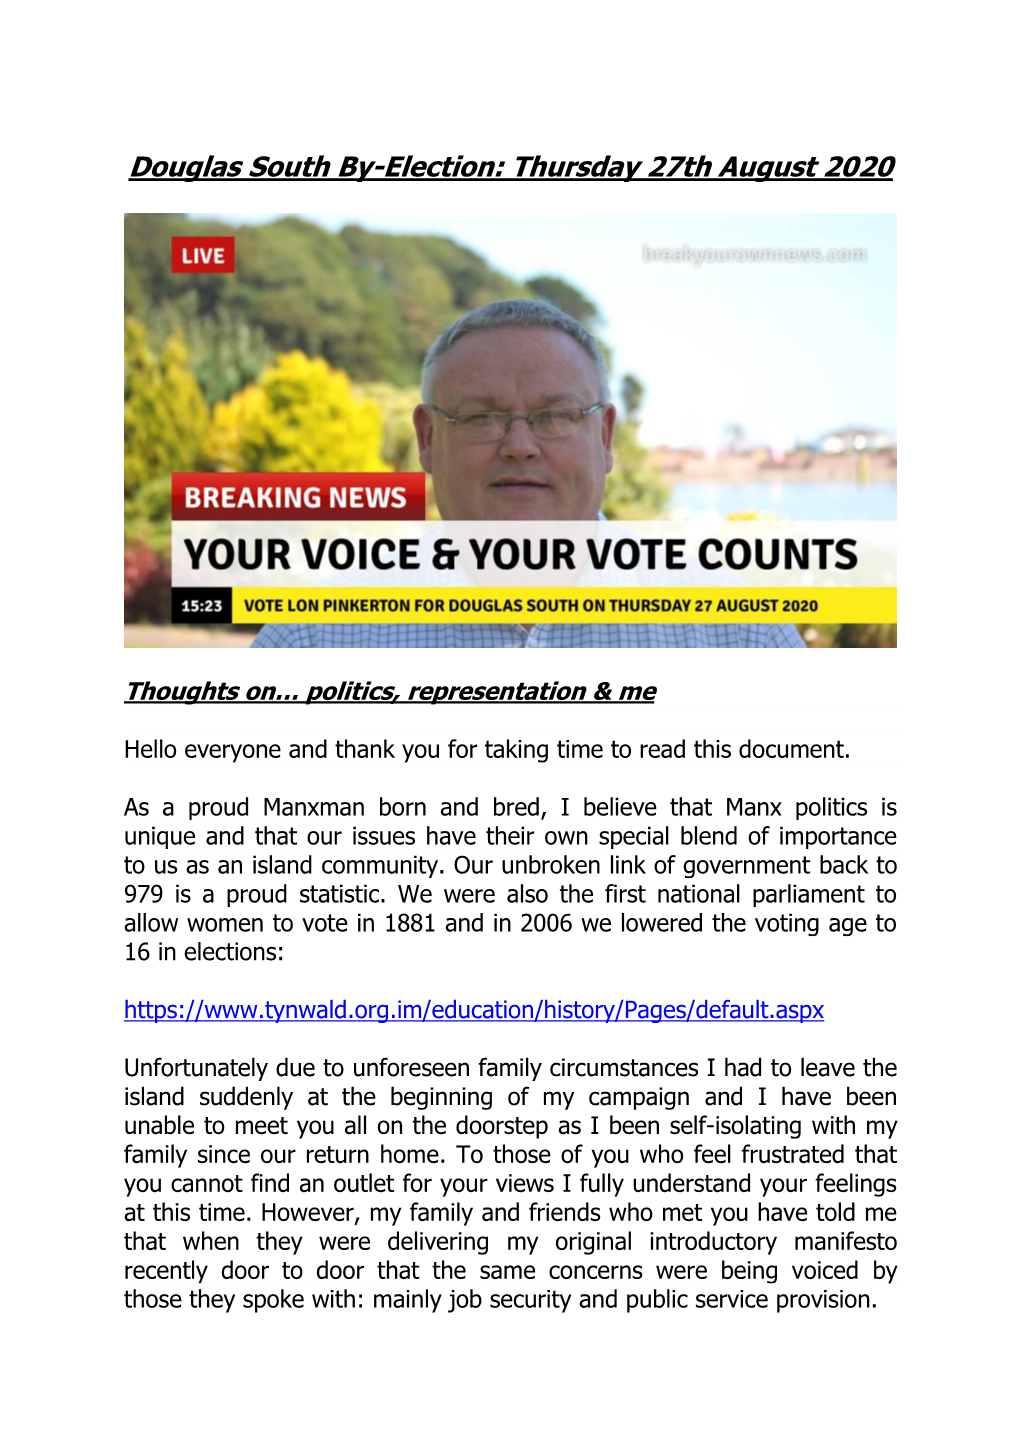 Lon Pinkerton - Douglas South By- Election 2020” Or Please Give Me a Call on 336272